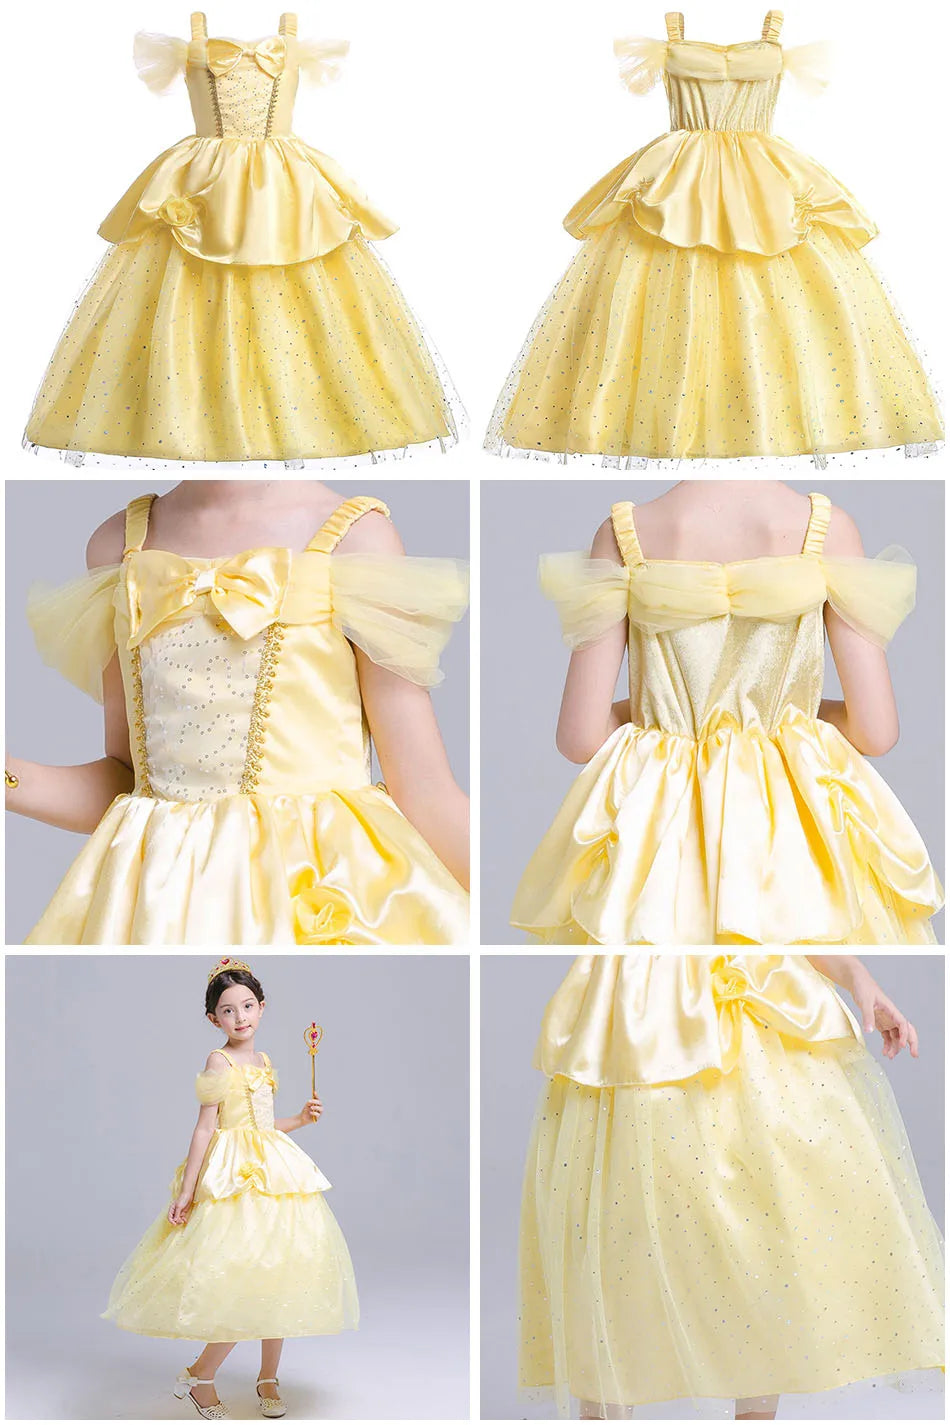 Princess Dresses Girls Belle Costume - Perfect for Party Christmas Birthday